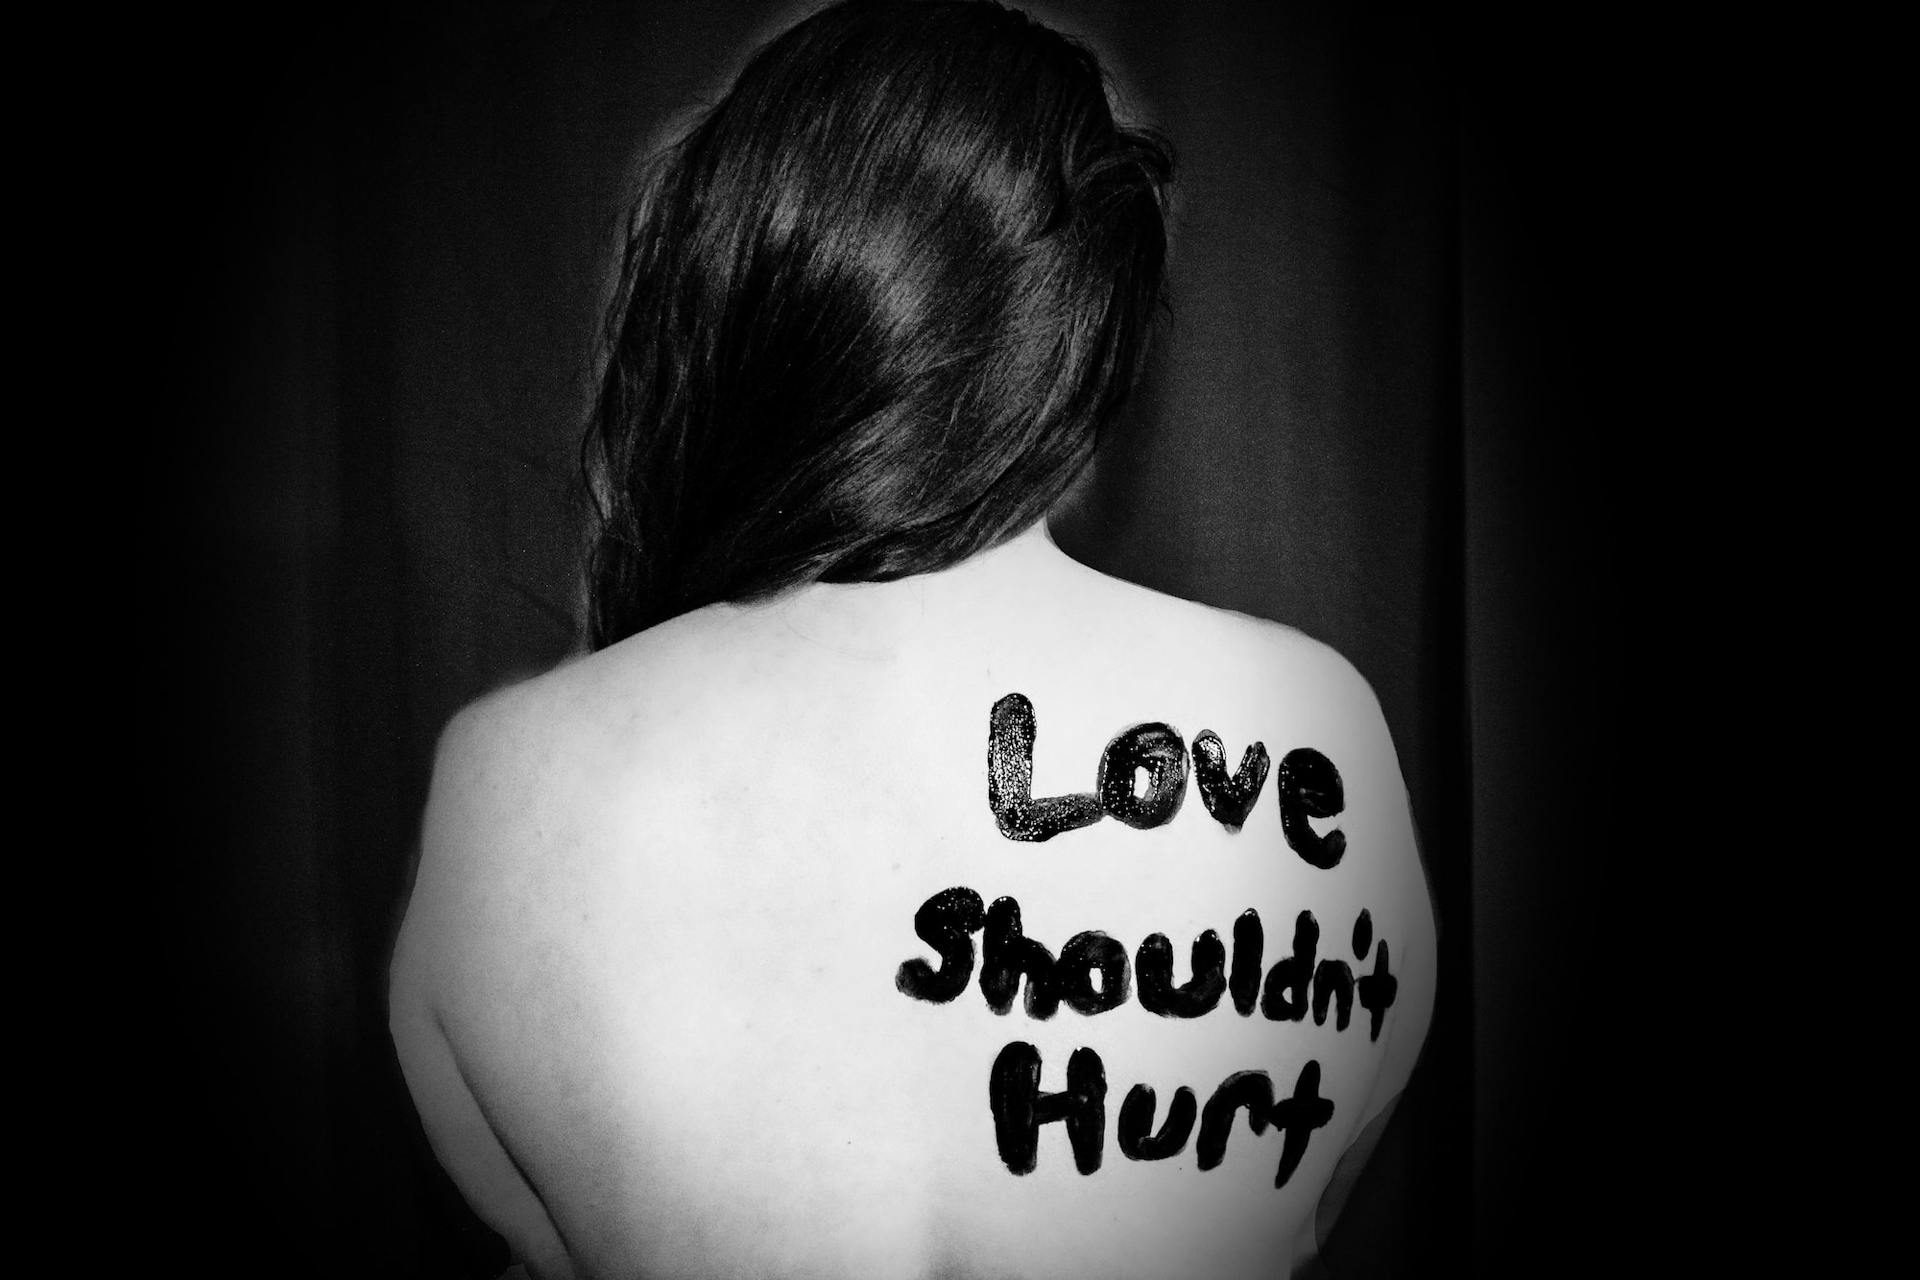 Someone sits with their back to the camera, the words 'Love shouldn't hurt' written on their back in black paint